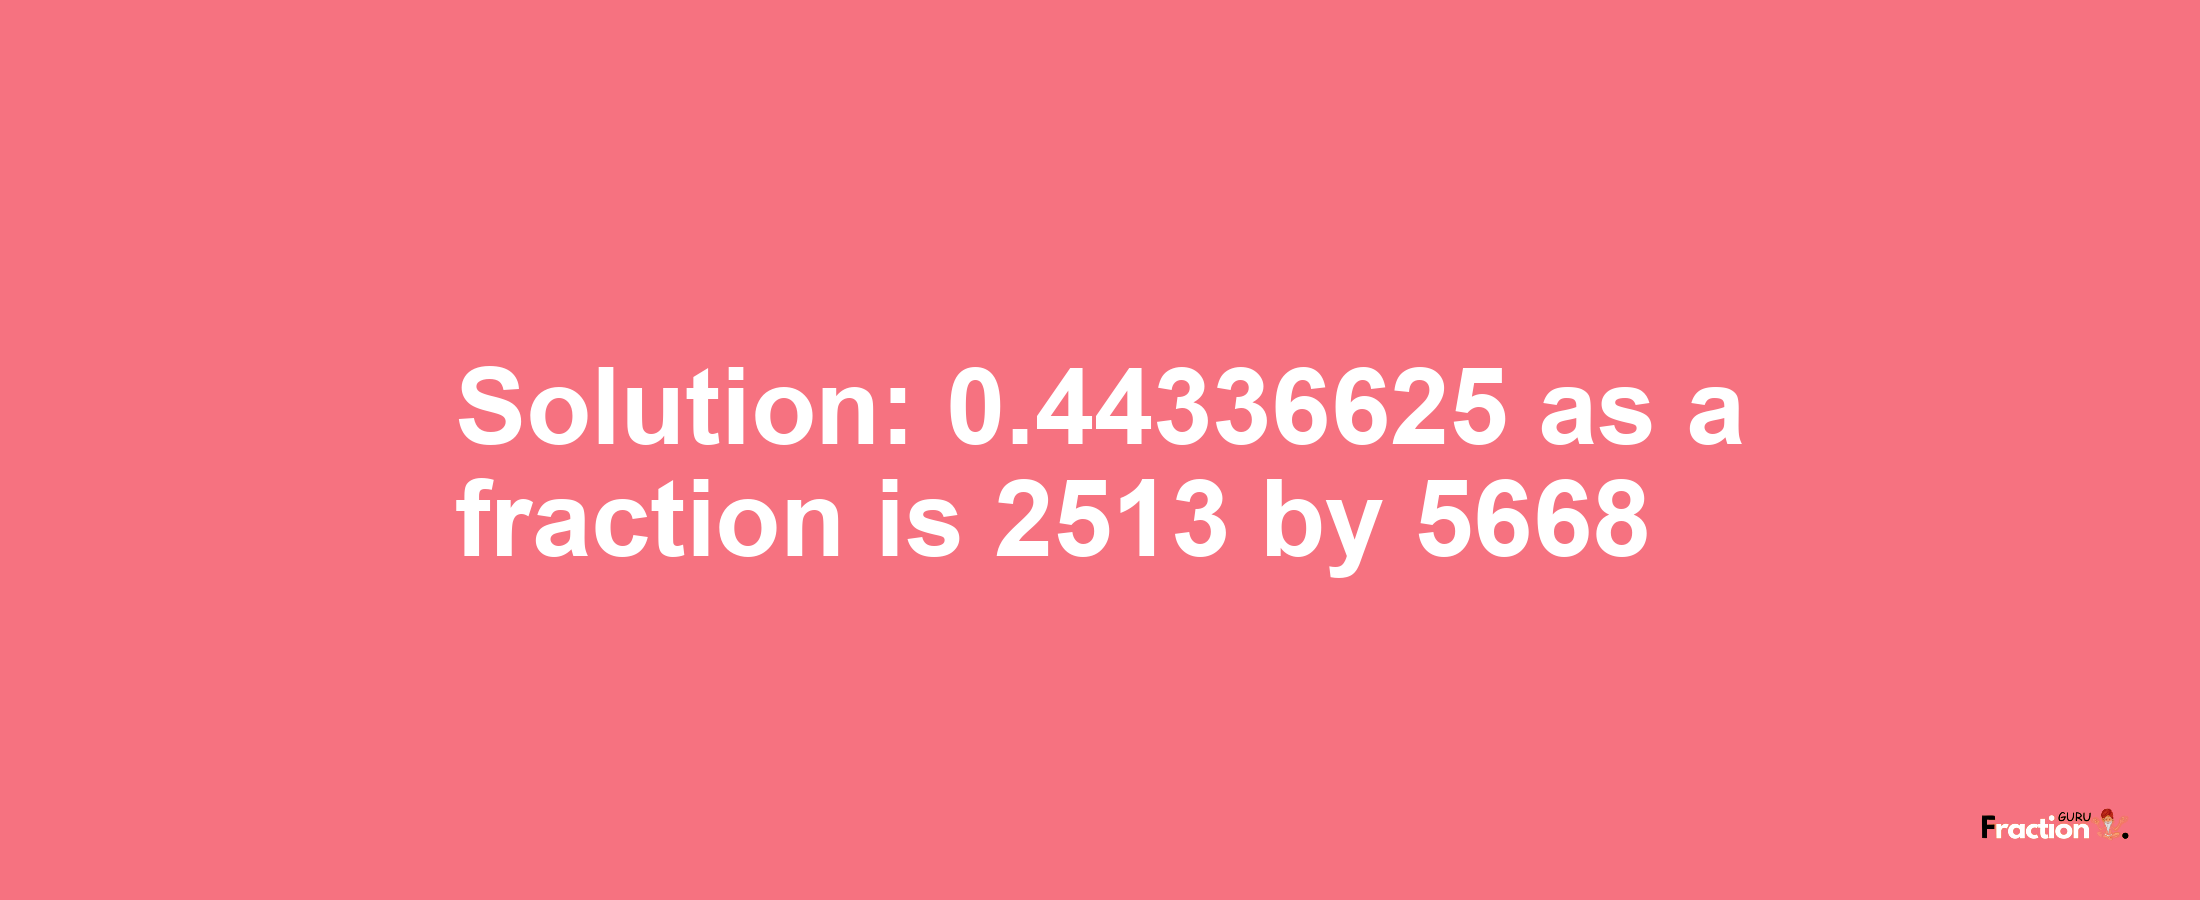 Solution:0.44336625 as a fraction is 2513/5668